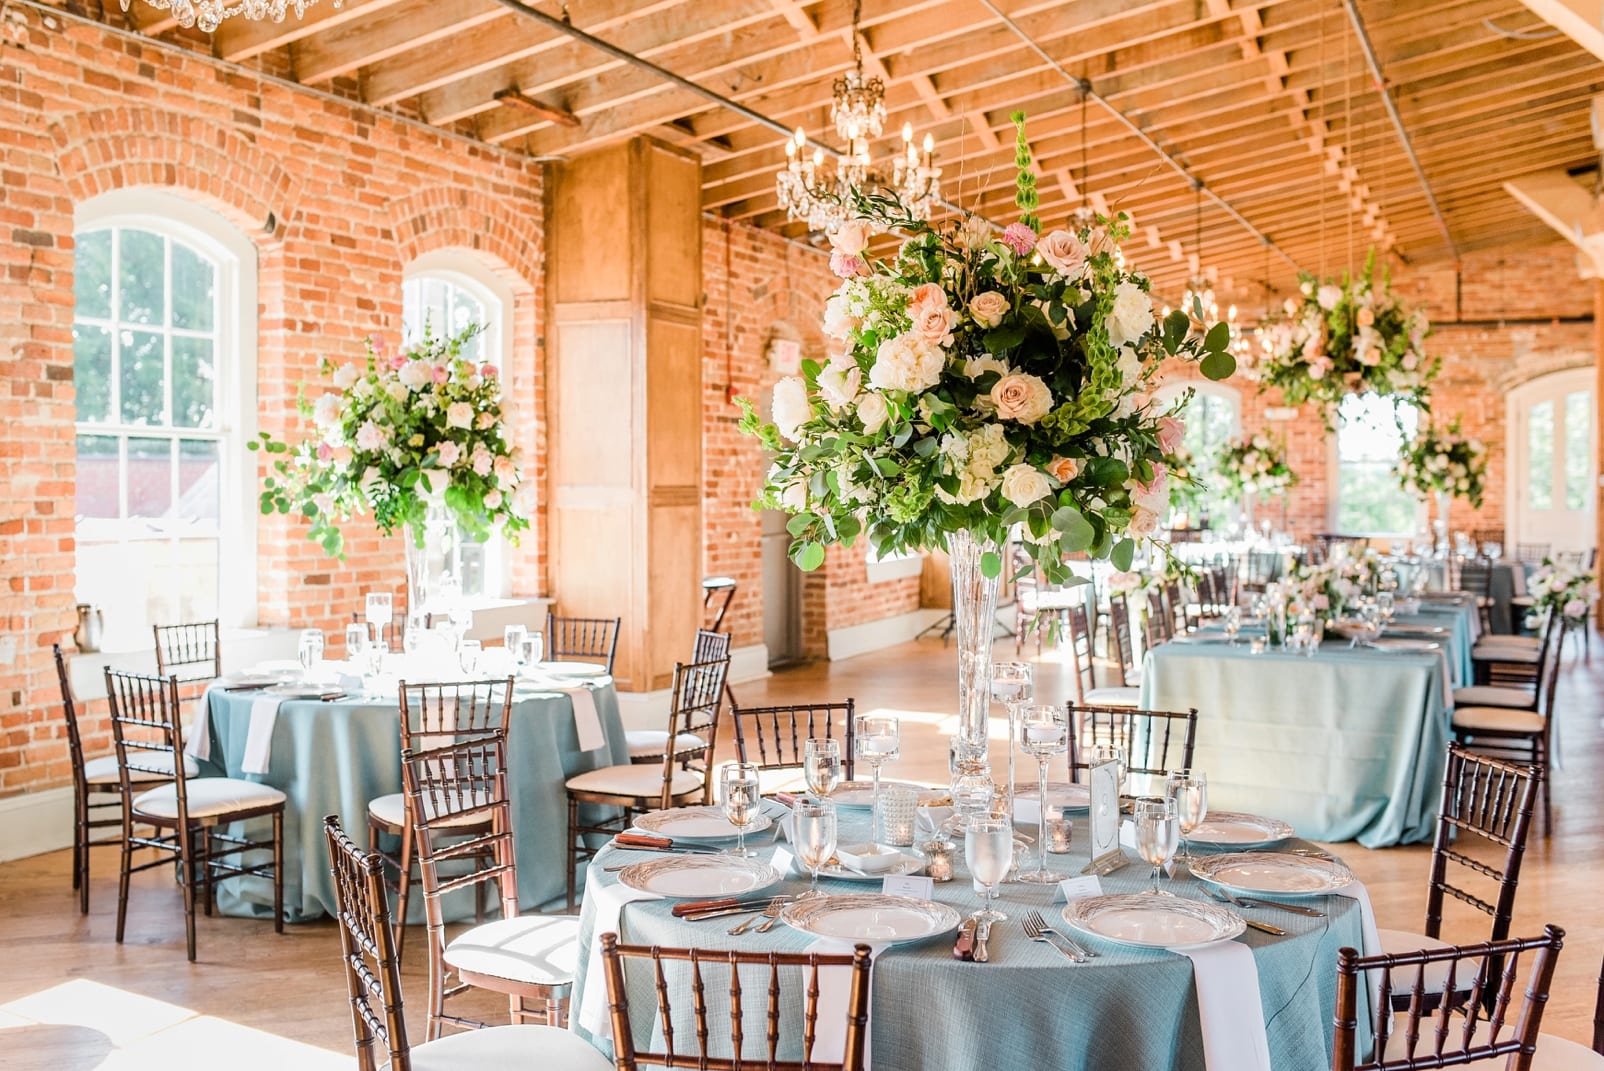 Raleigh indoor wedding reception at Melrose Knitting Mill with exposed red brick walls and light blue table clothes photo